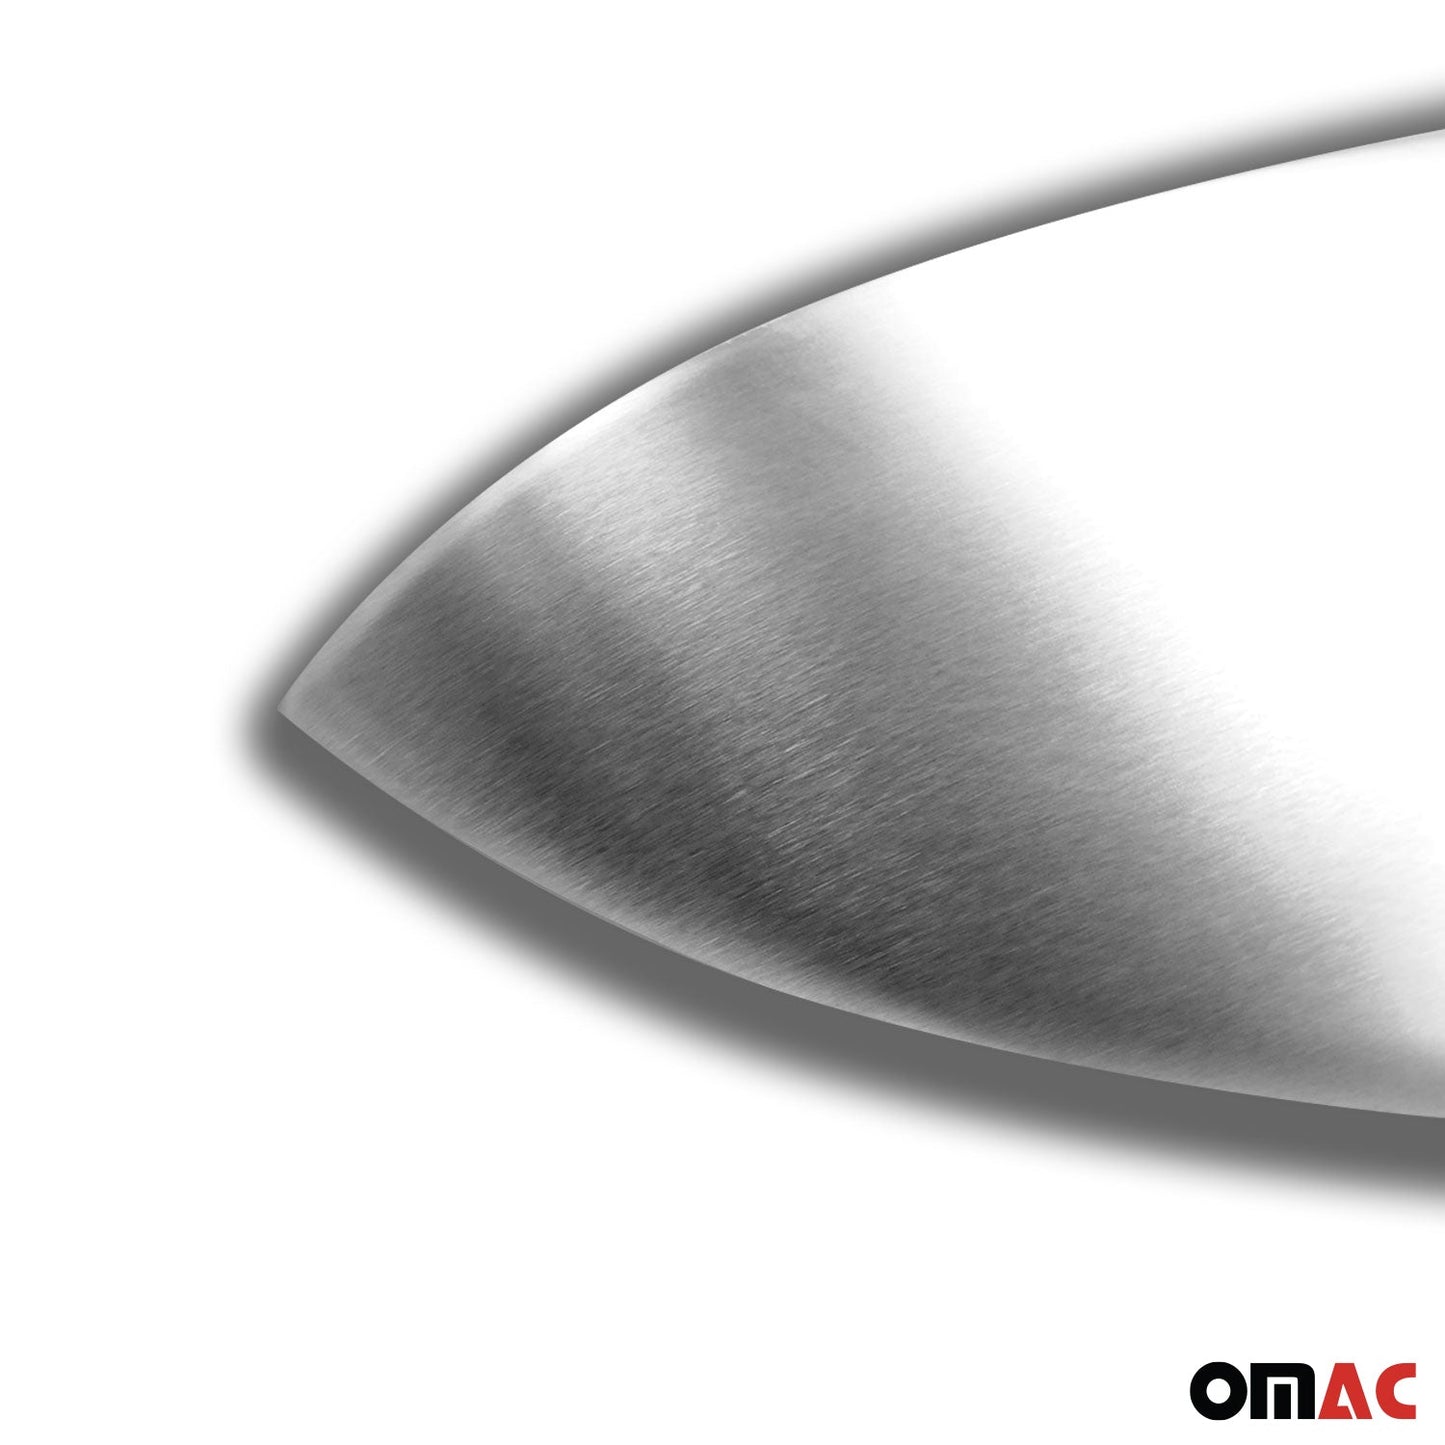 OMAC Side Mirror Cover Caps Fits Kia Sportage 2011-2014 Brushed Steel Silver 2 Pcs 4016111T